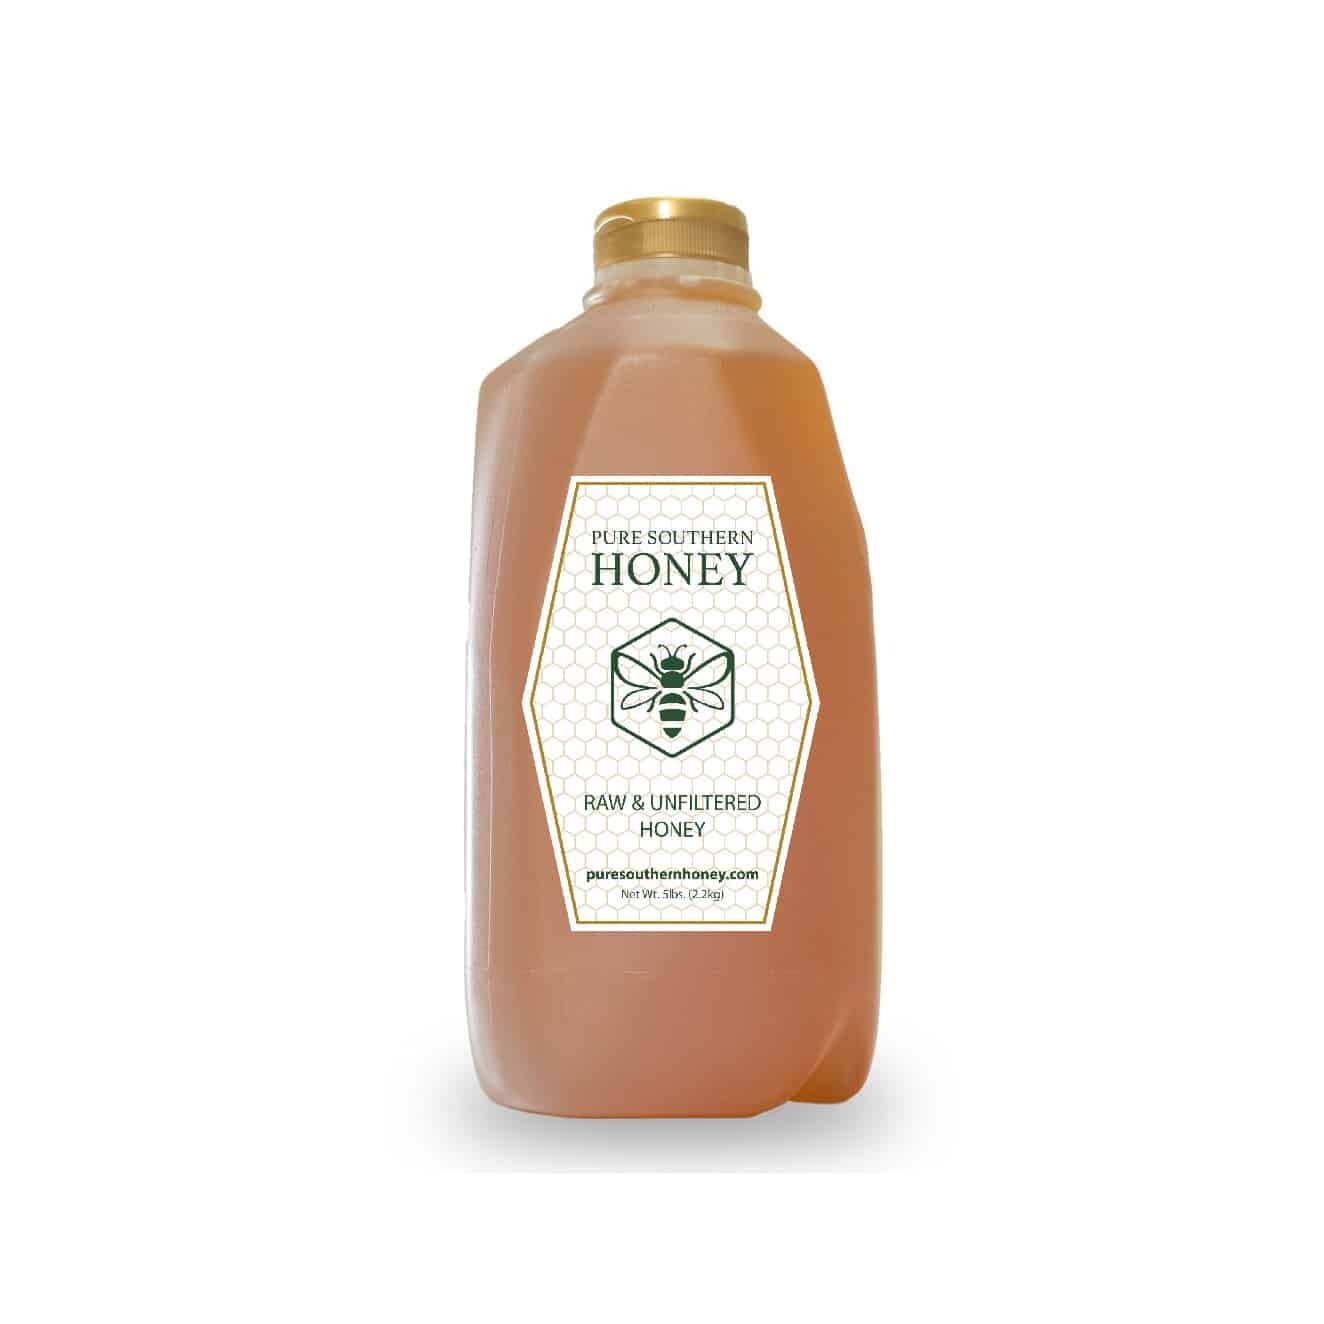 Raw & Unfiltered Honey (Case) - 5 lbs